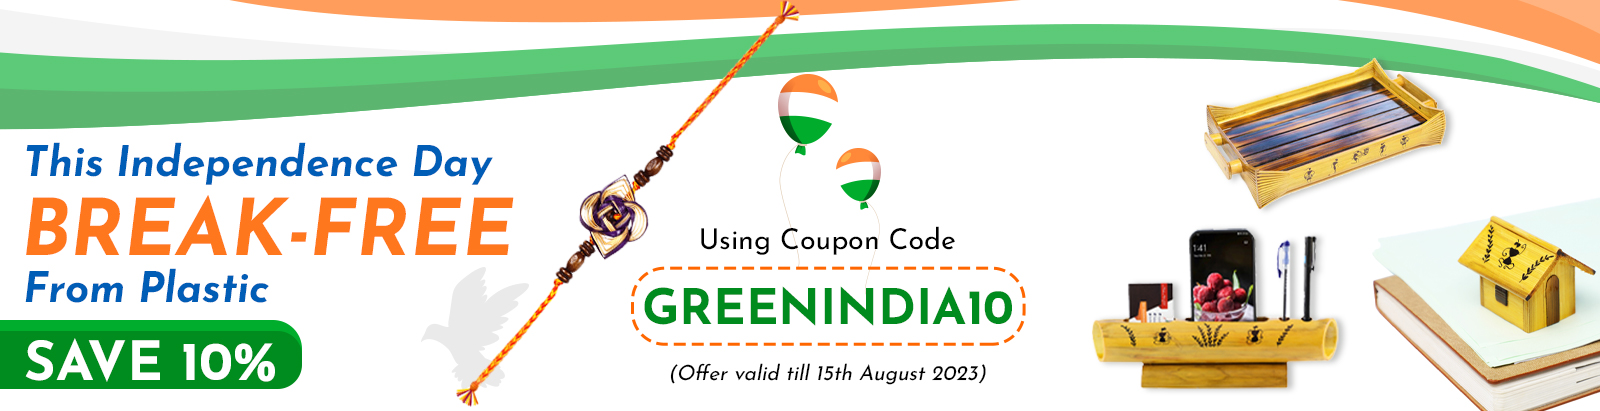 Independence Day offer